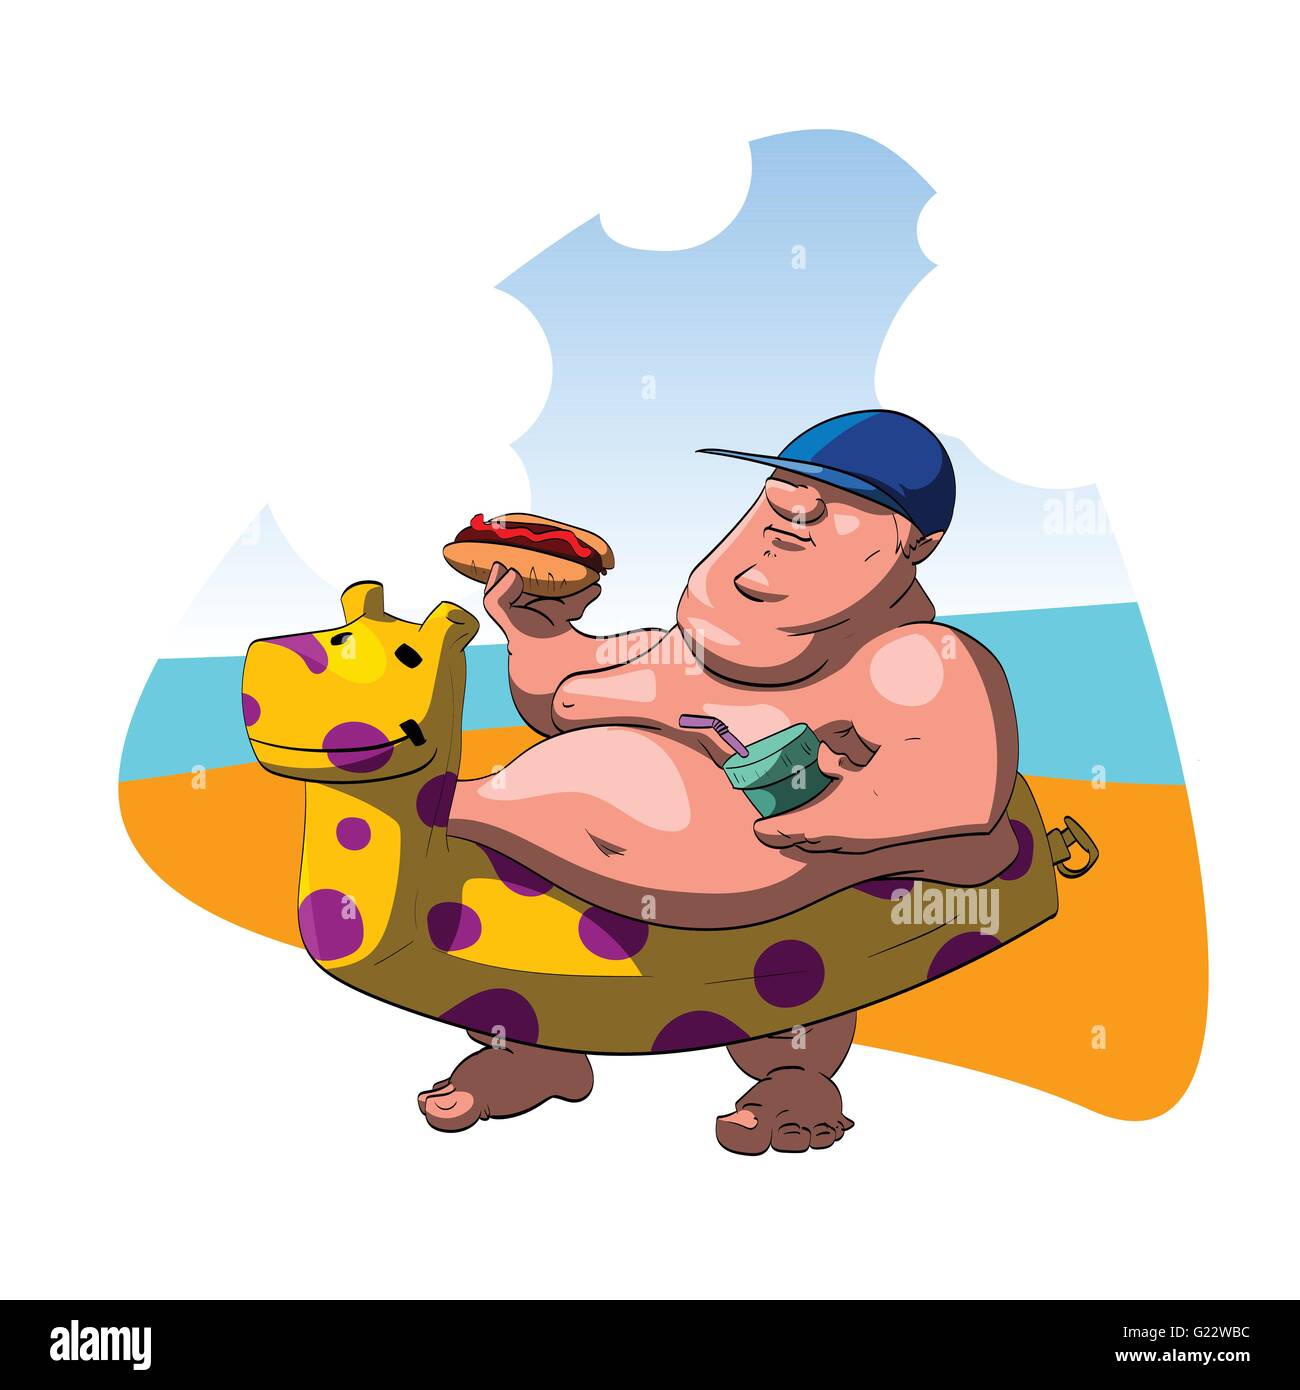 Fat man on the beach, having a shake and a hot dog. Wearing a blue hat and a float. Stock Vector